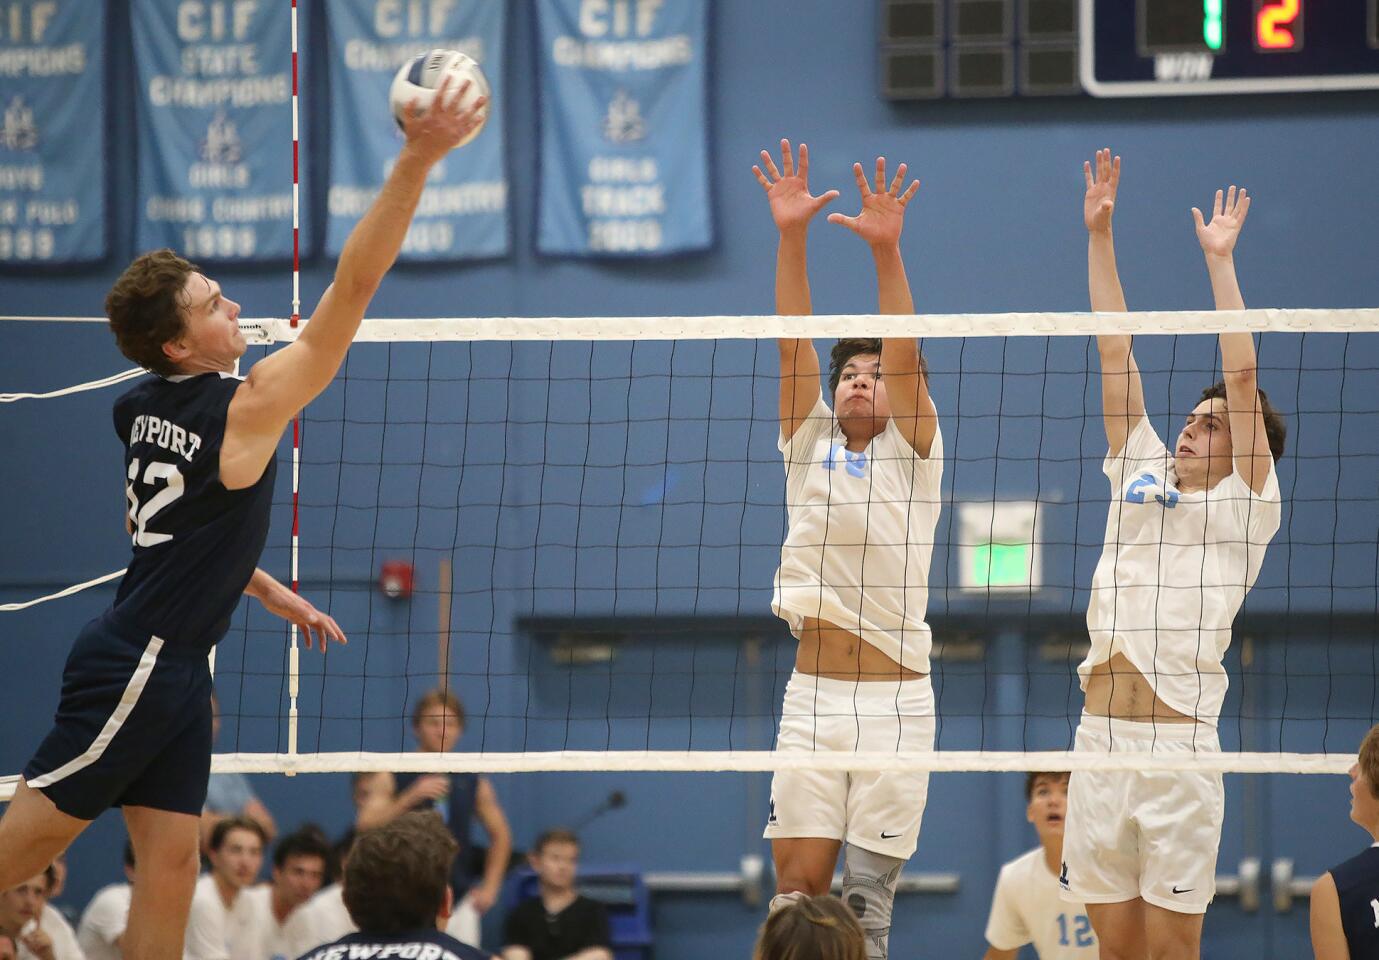 Newport Harbor's Dayne Chalmers, left, goes up high and wide to put the ball past two Corona del Mar blockers during second round of the Battle of the Bay boys' volleyball match in Surf League play on Wednesday.